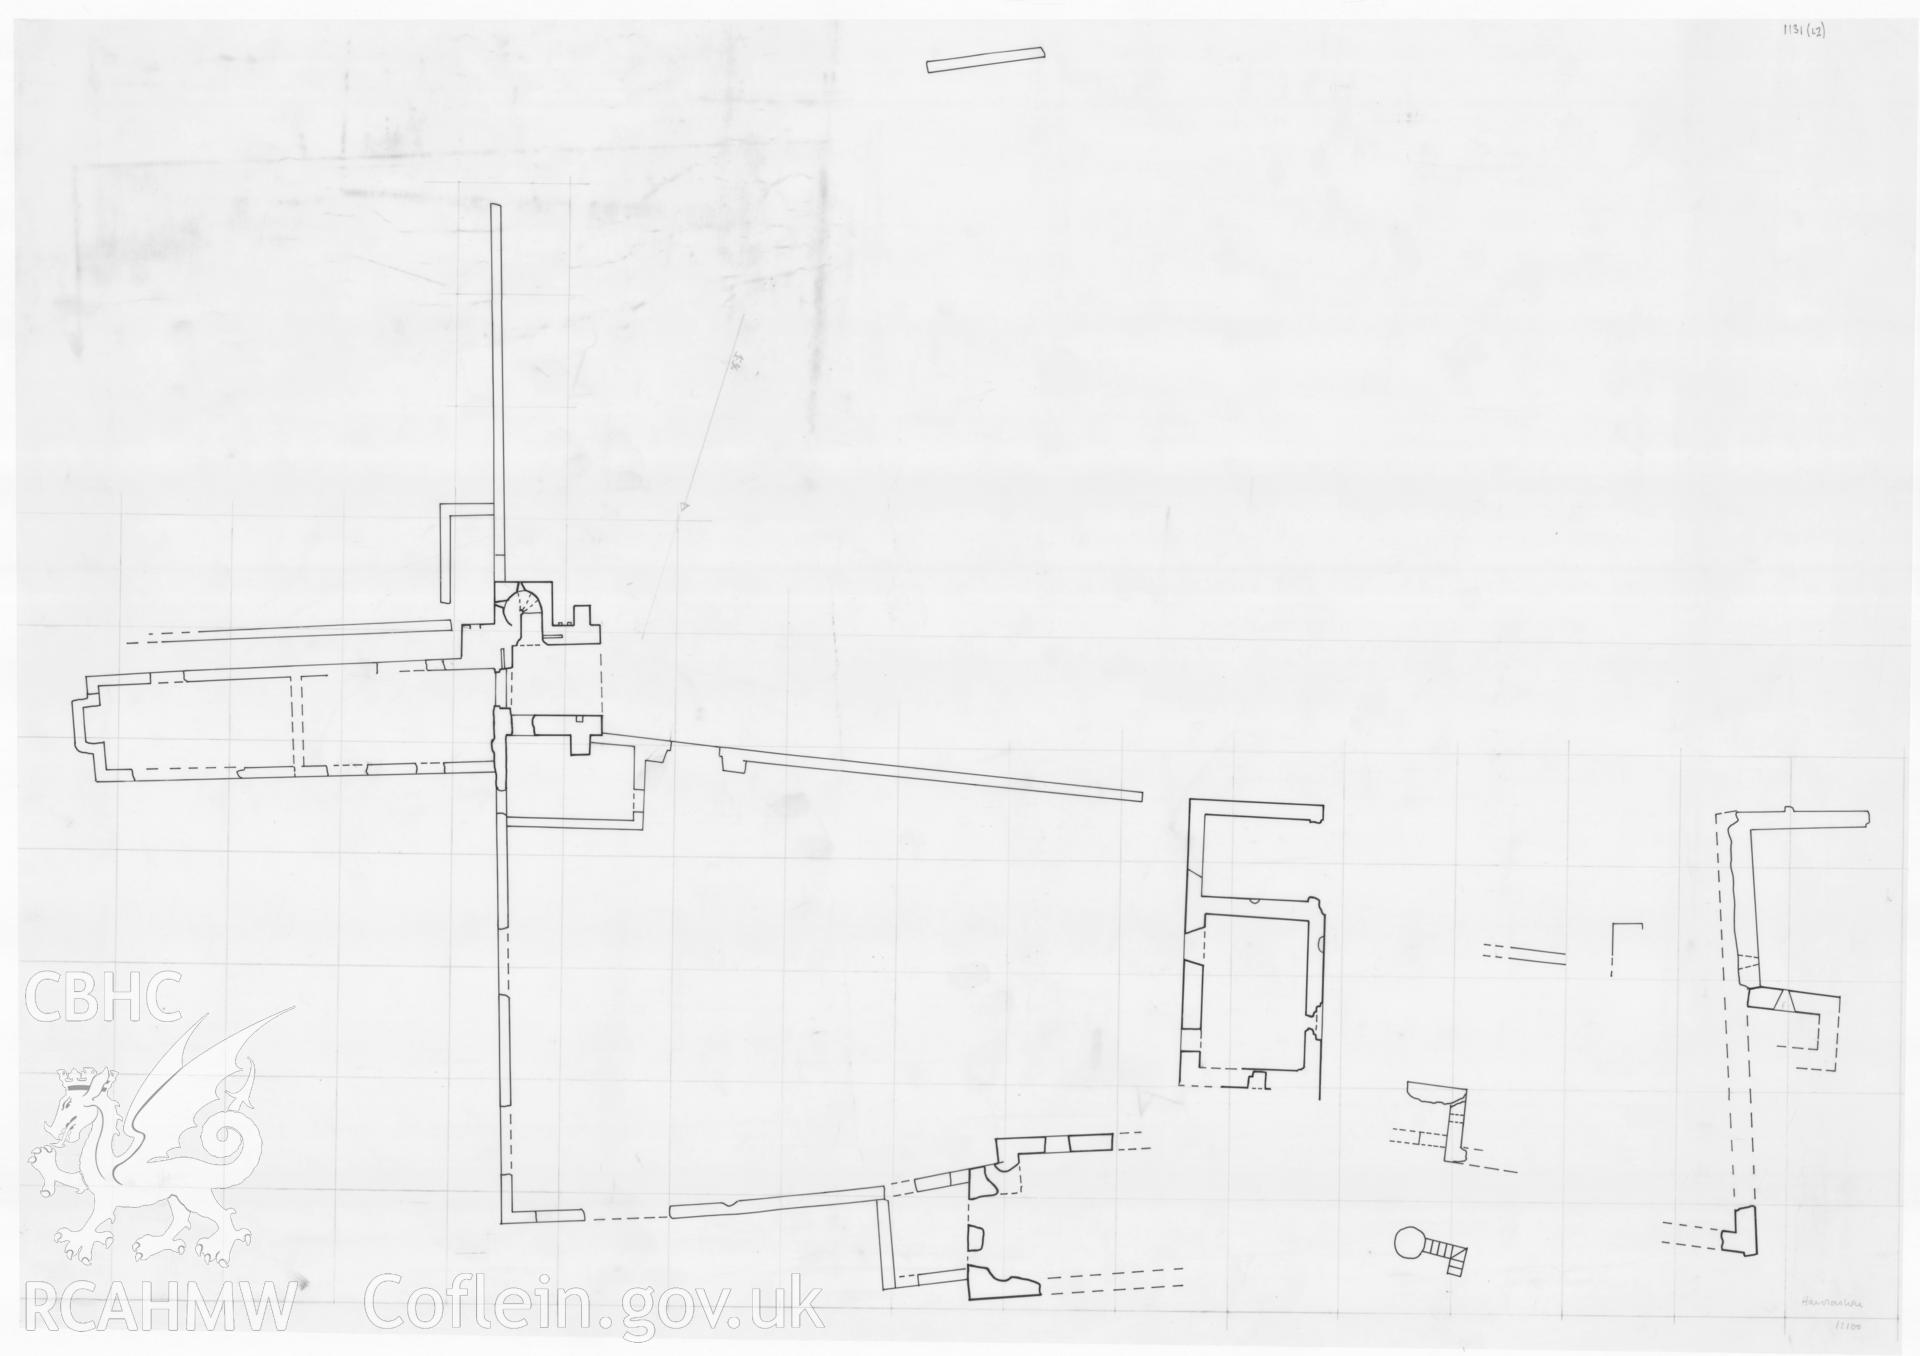 RCAHMW drawing by Tony Parkinson showing plan of Haroldston, Haverfordwest.